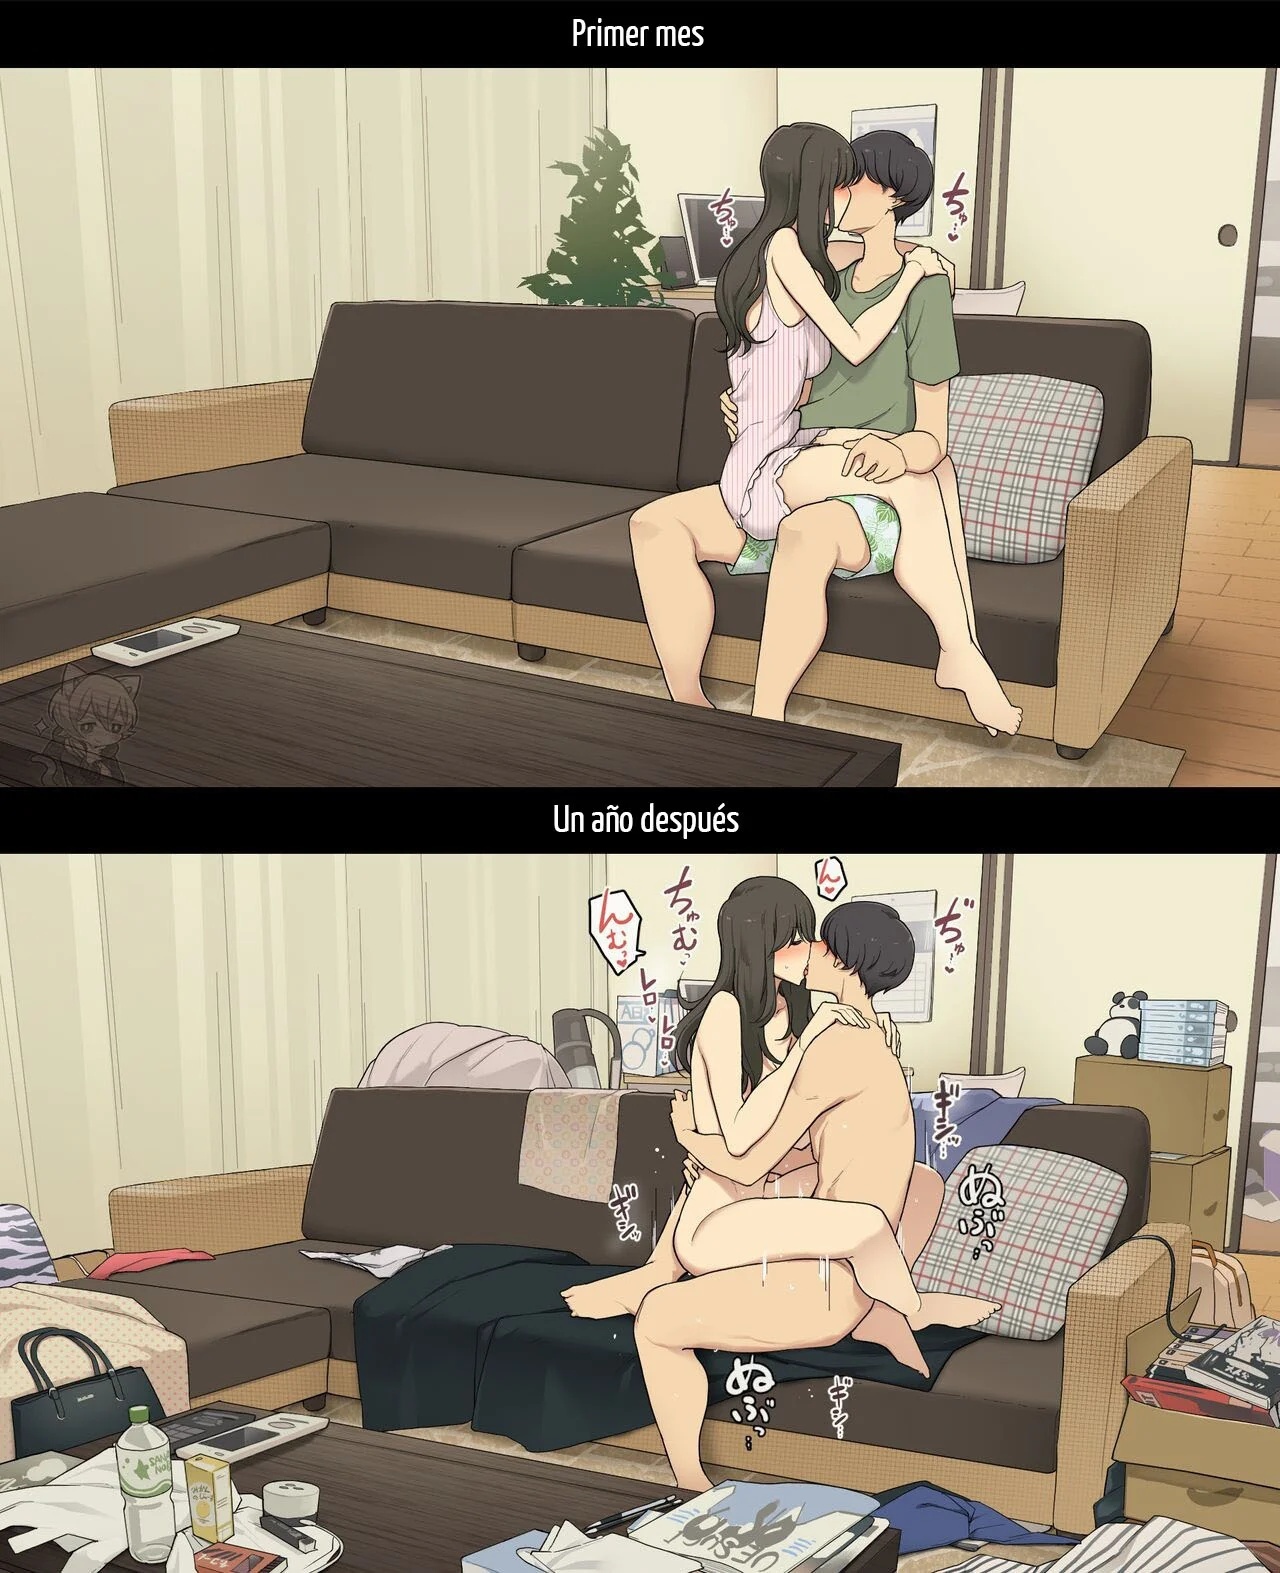 Their First Month Living Together vs One Year Later - 14